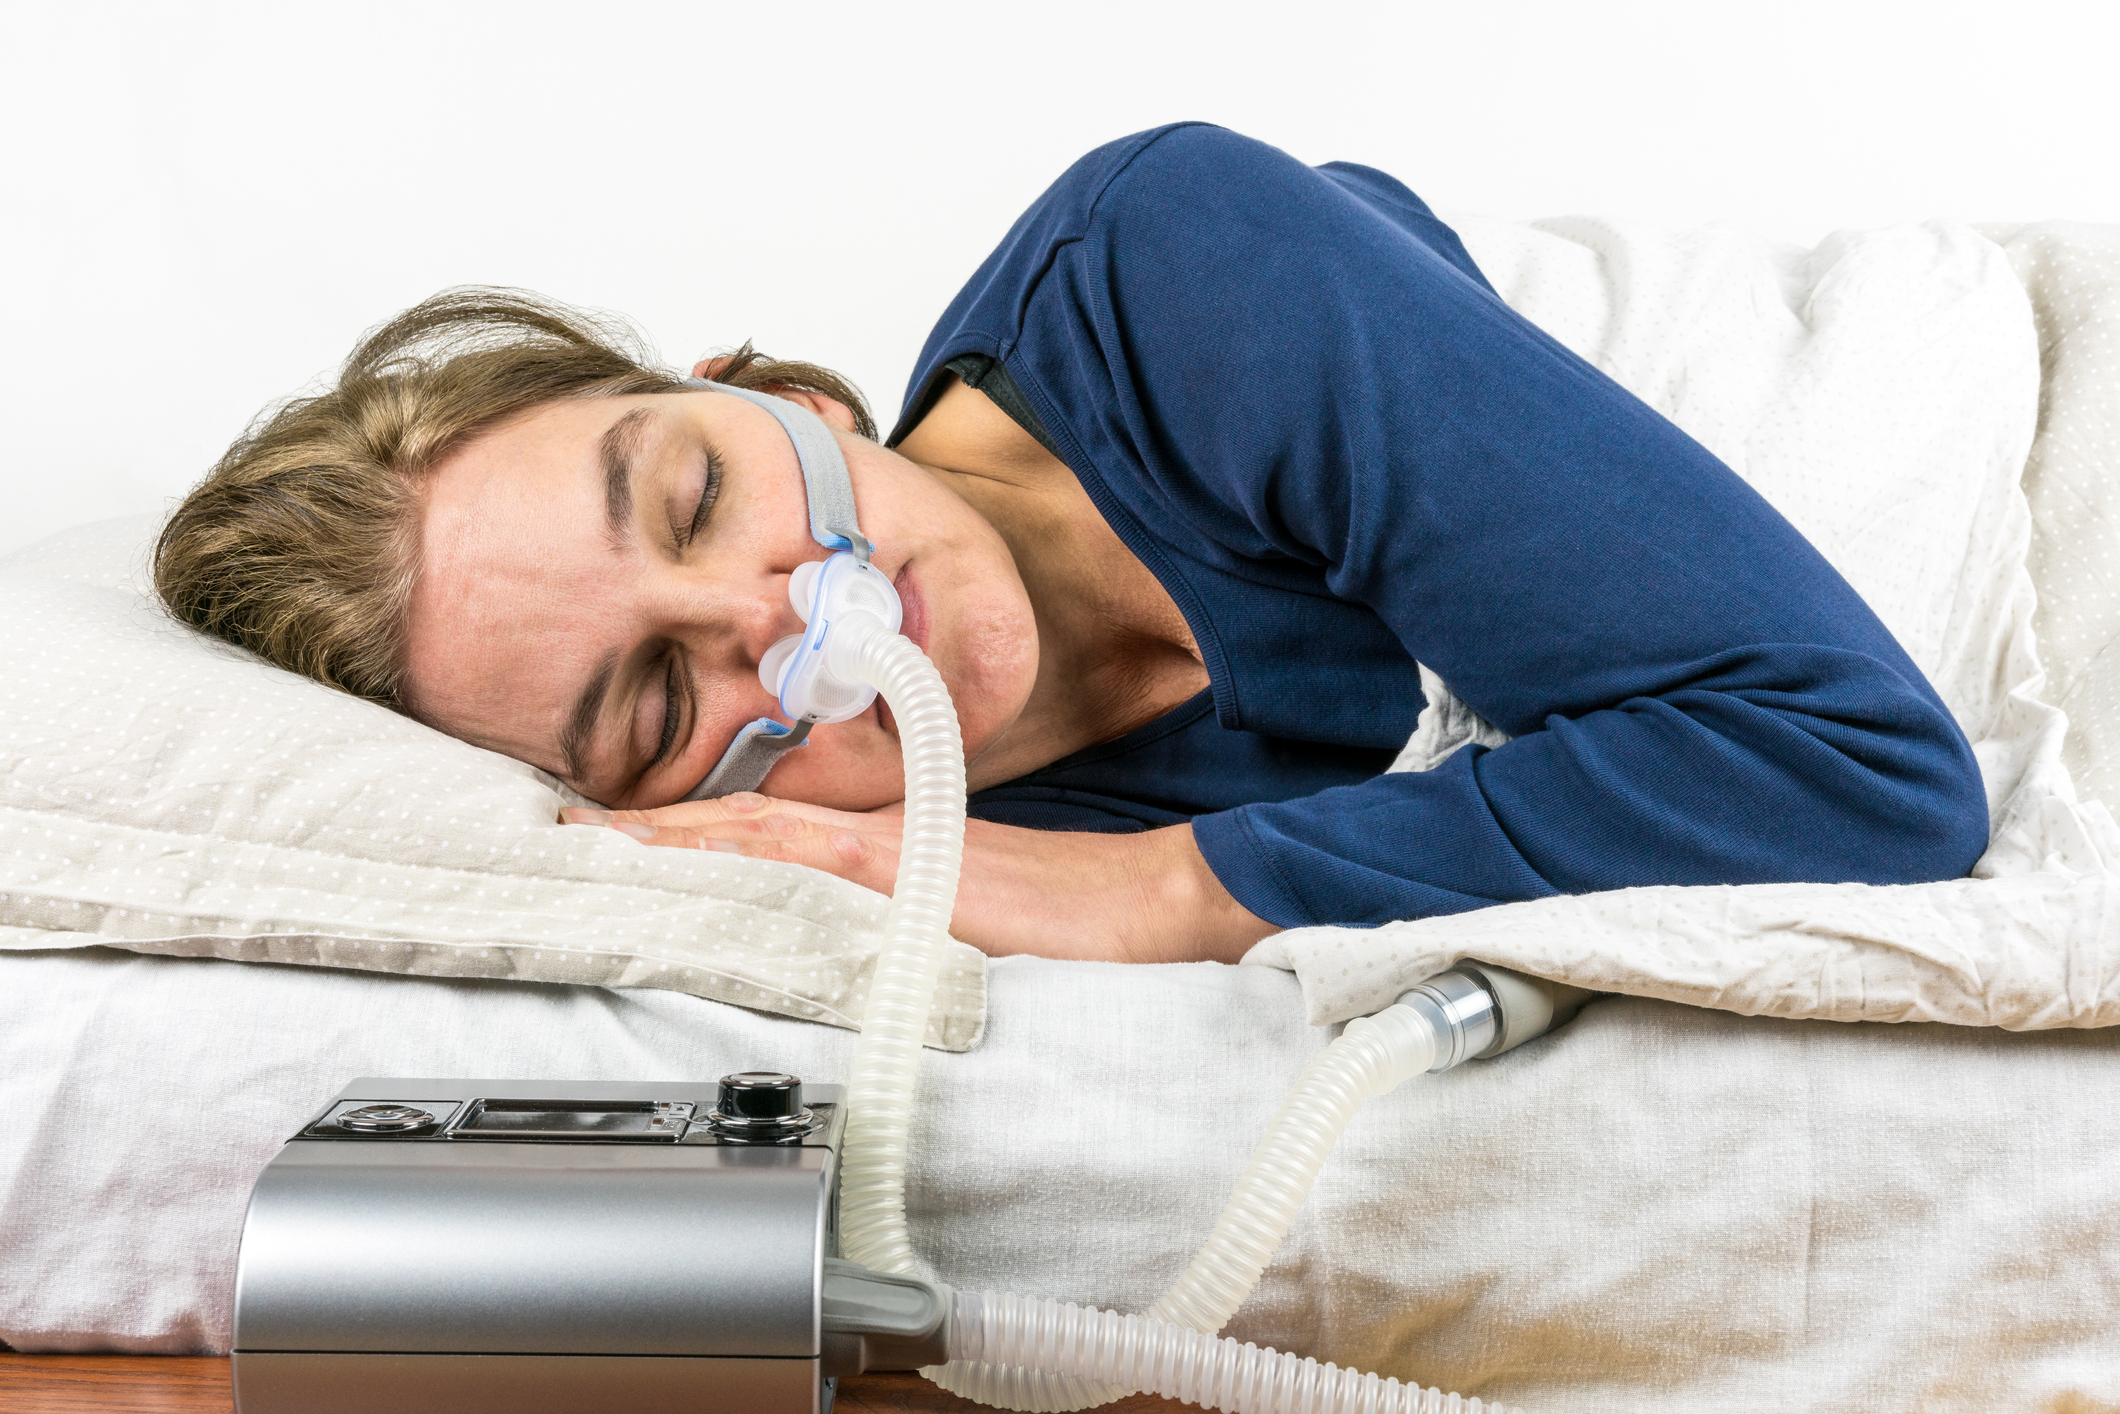 Woman sleeping on her side with CPAP machine in the foreground, sleep apnea treatment.